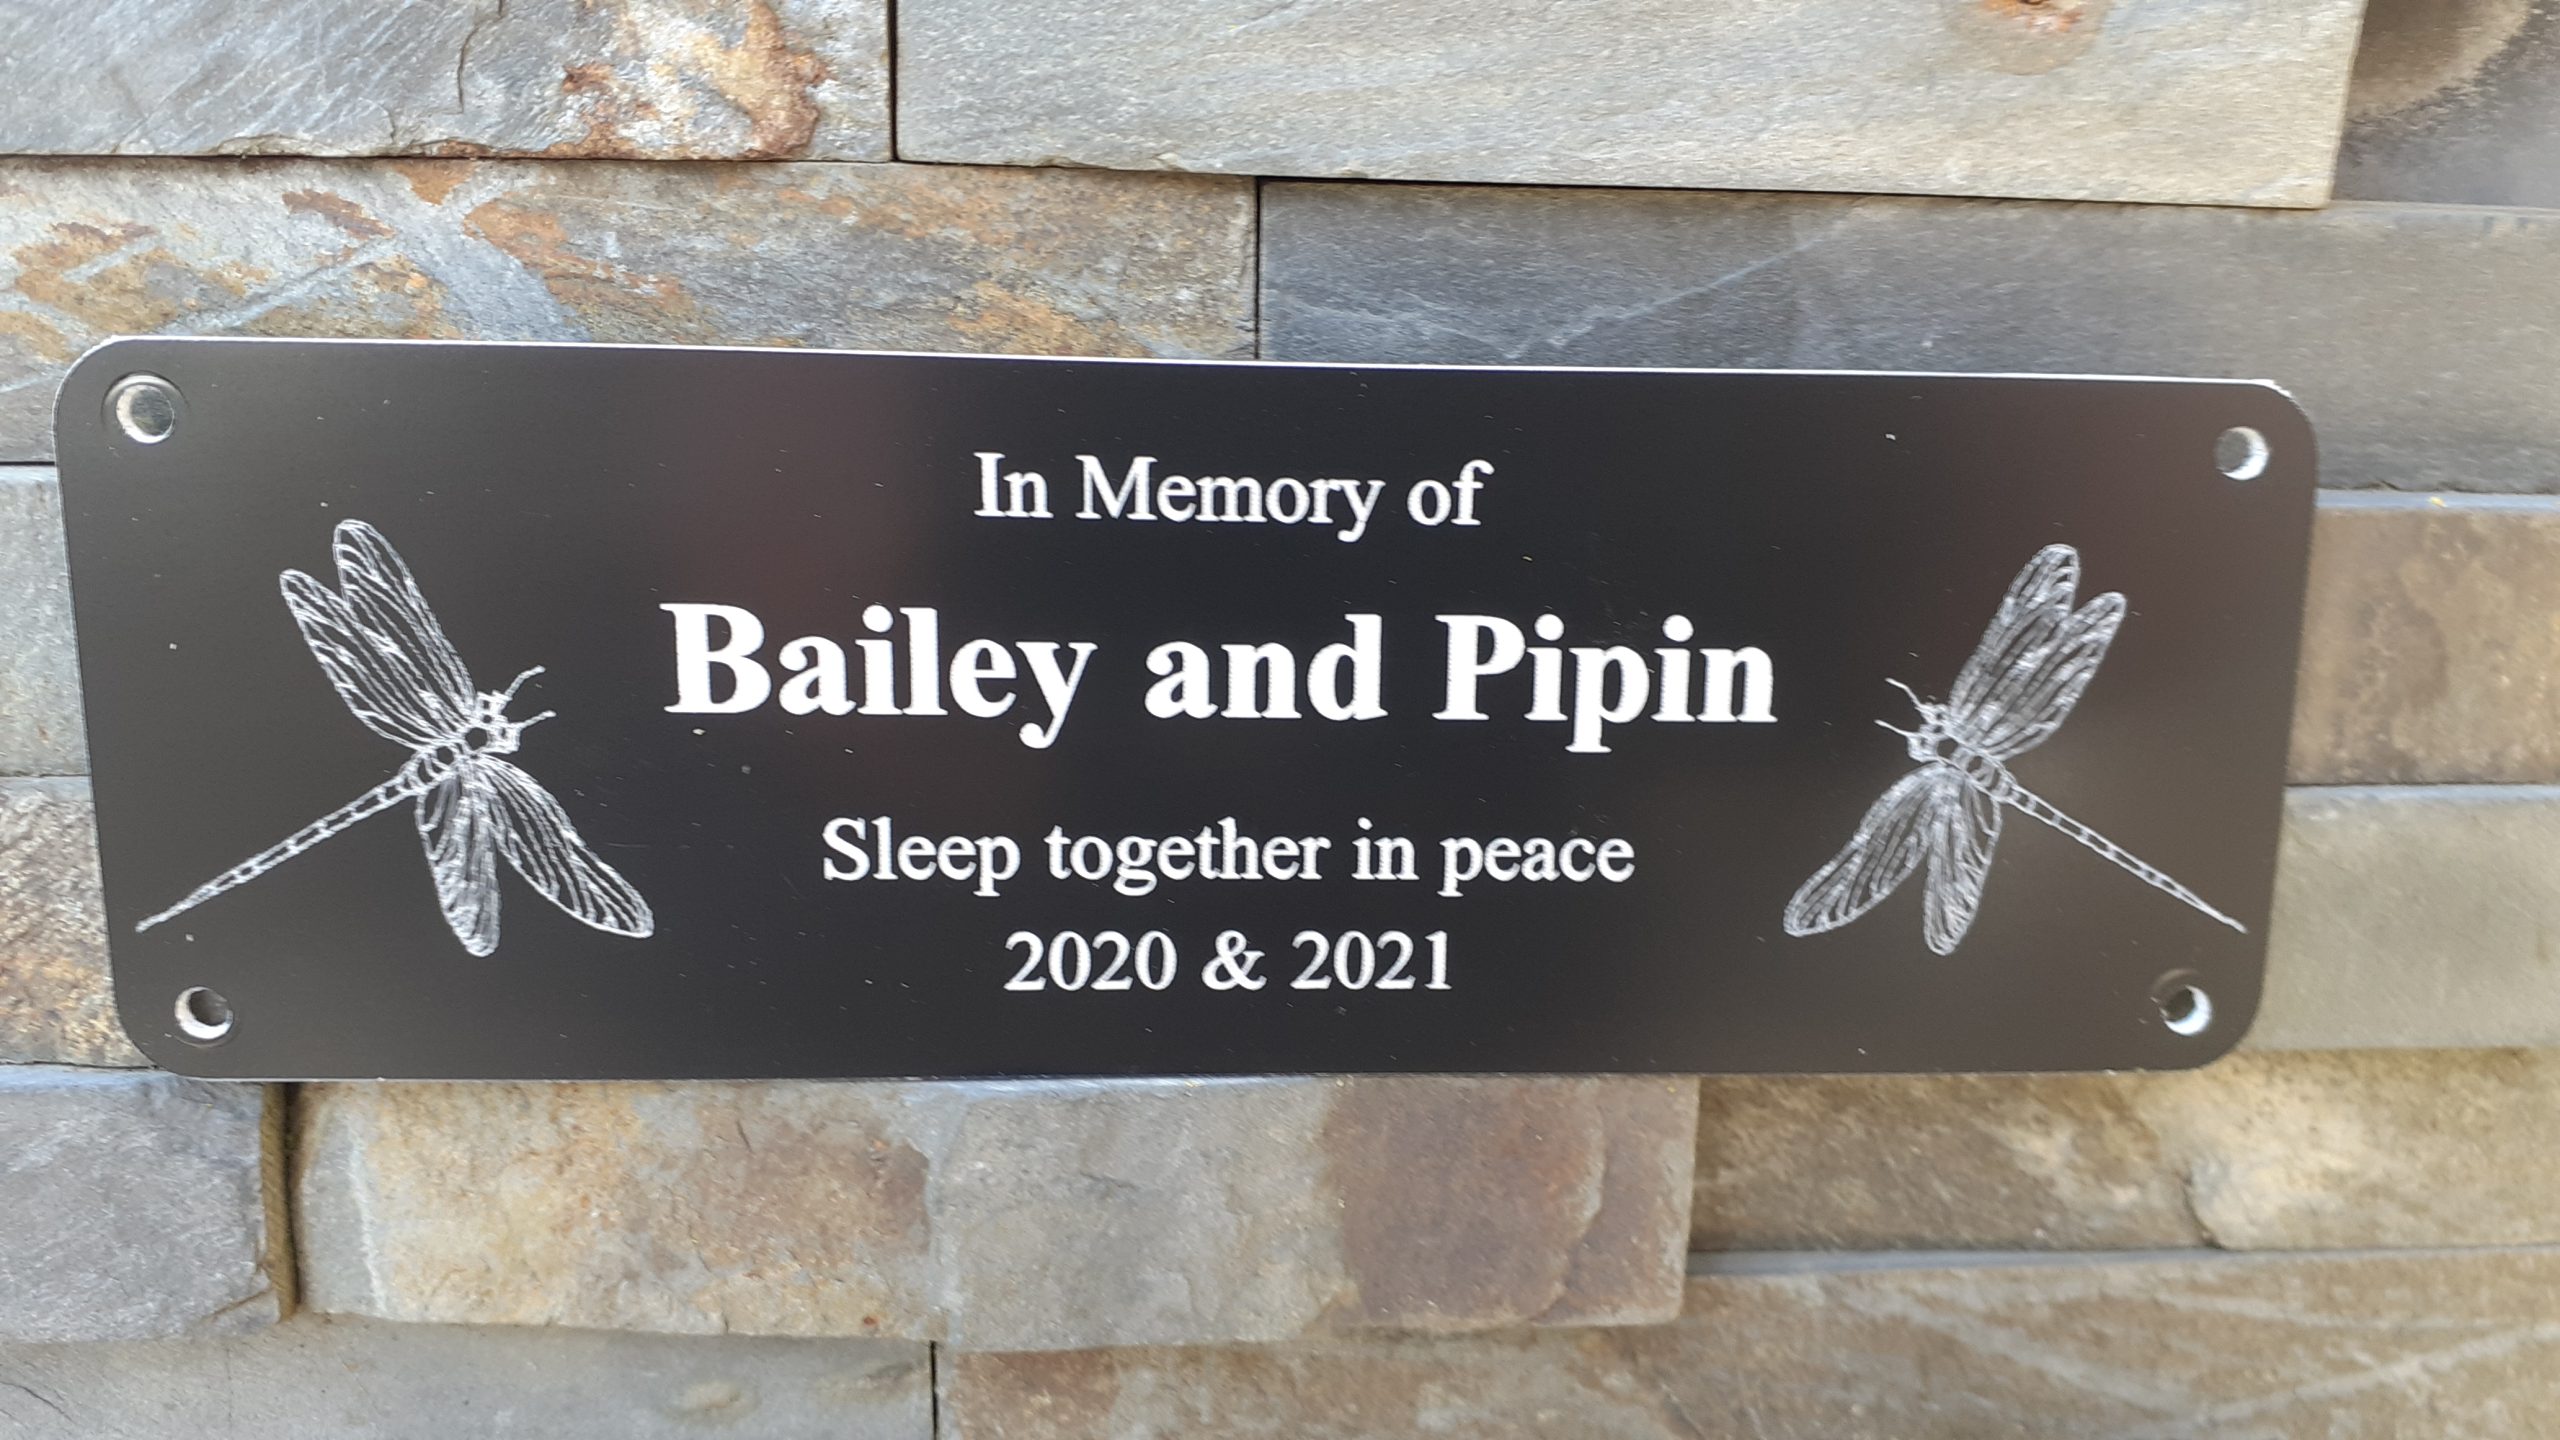 Personalised bench Plaques - 6" x 2" with decorative dragonflies either side of the white engraved text, 4 screw holes in each corner.